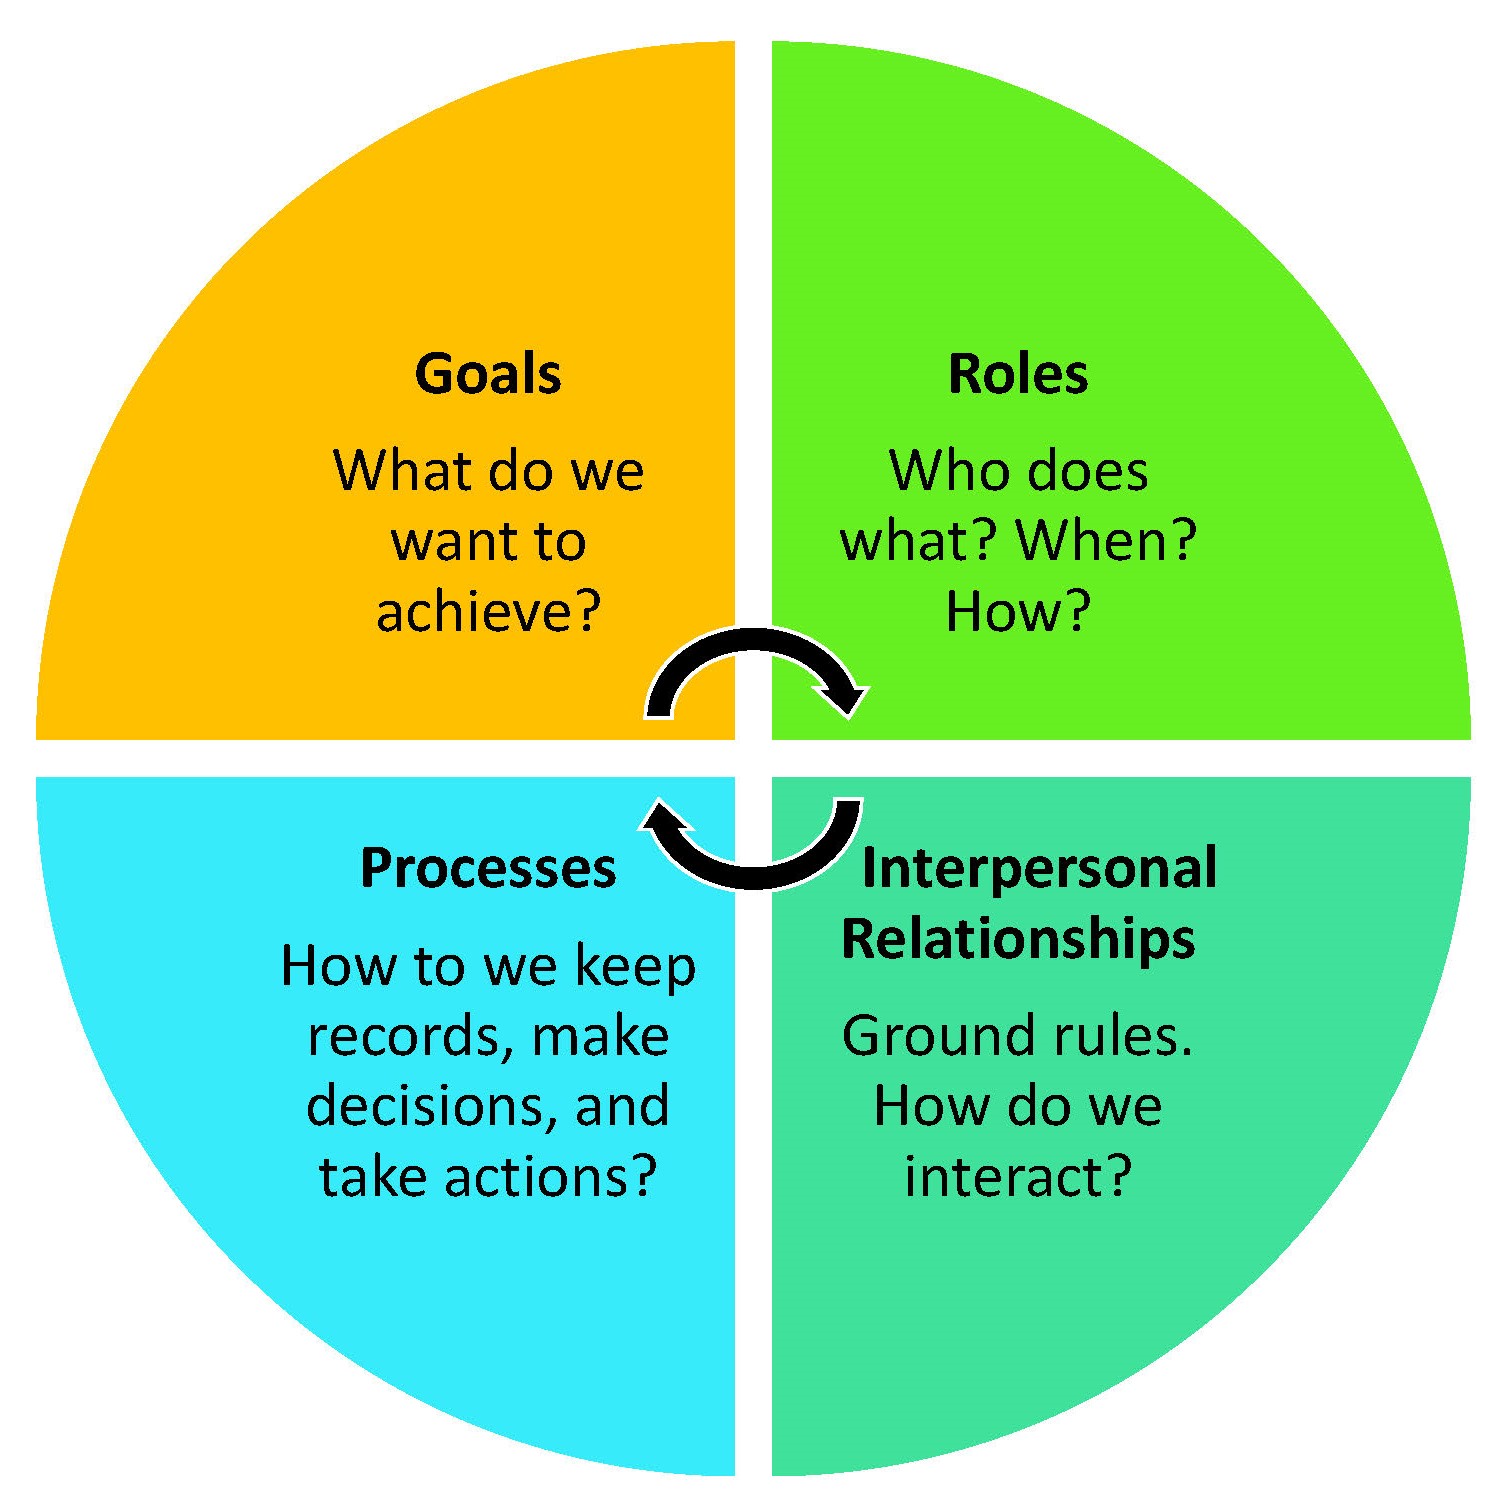 Circle image divided into 4 equal portions, with each of the 4 GRIP elements in them: Goals, Roles, Interpersonal Relationships, and Rrocesses.